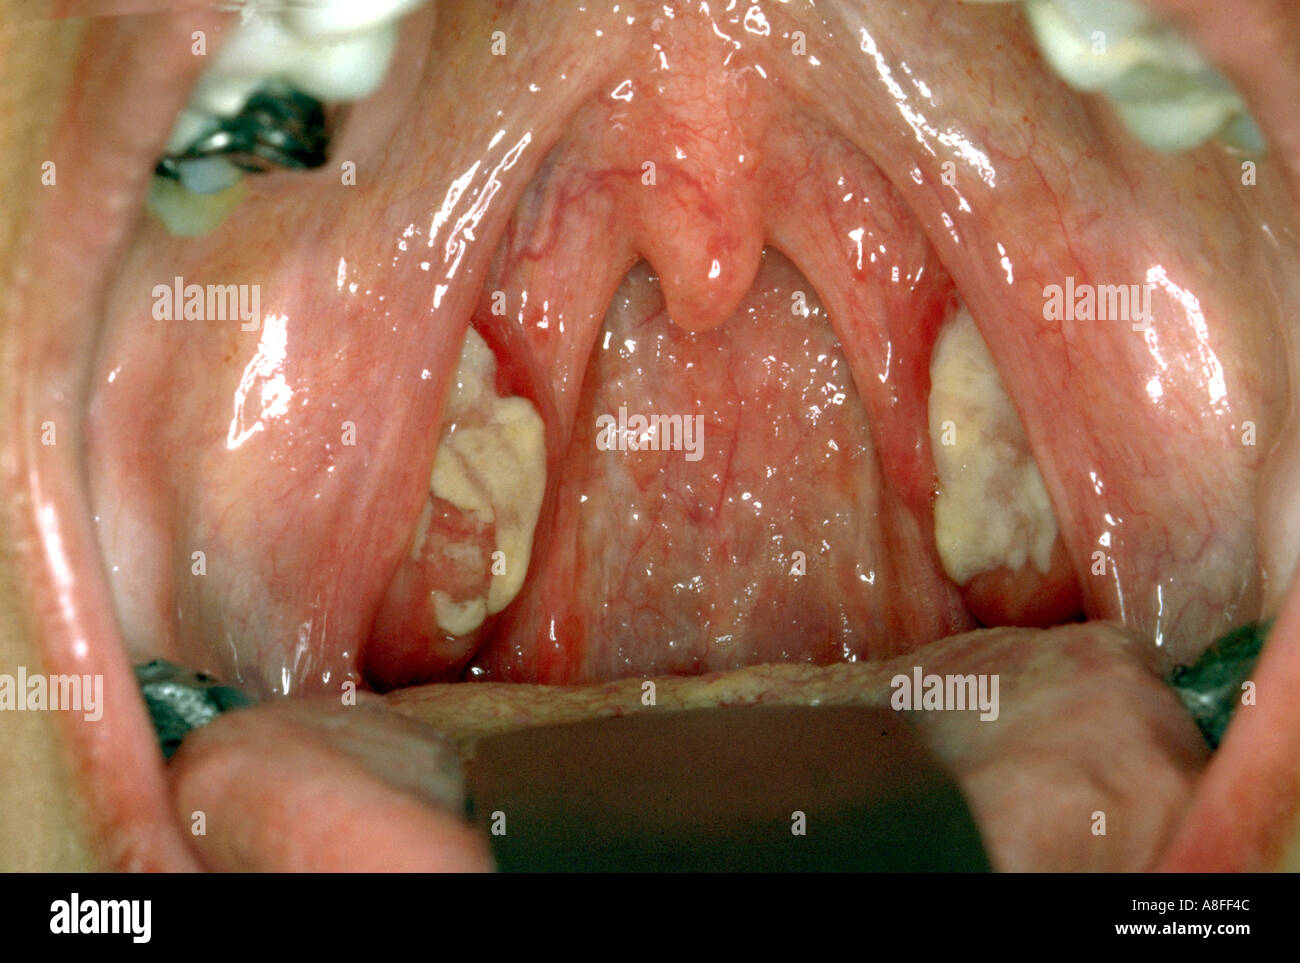 Sore Throat Images - Photos - Pictures - Page 3